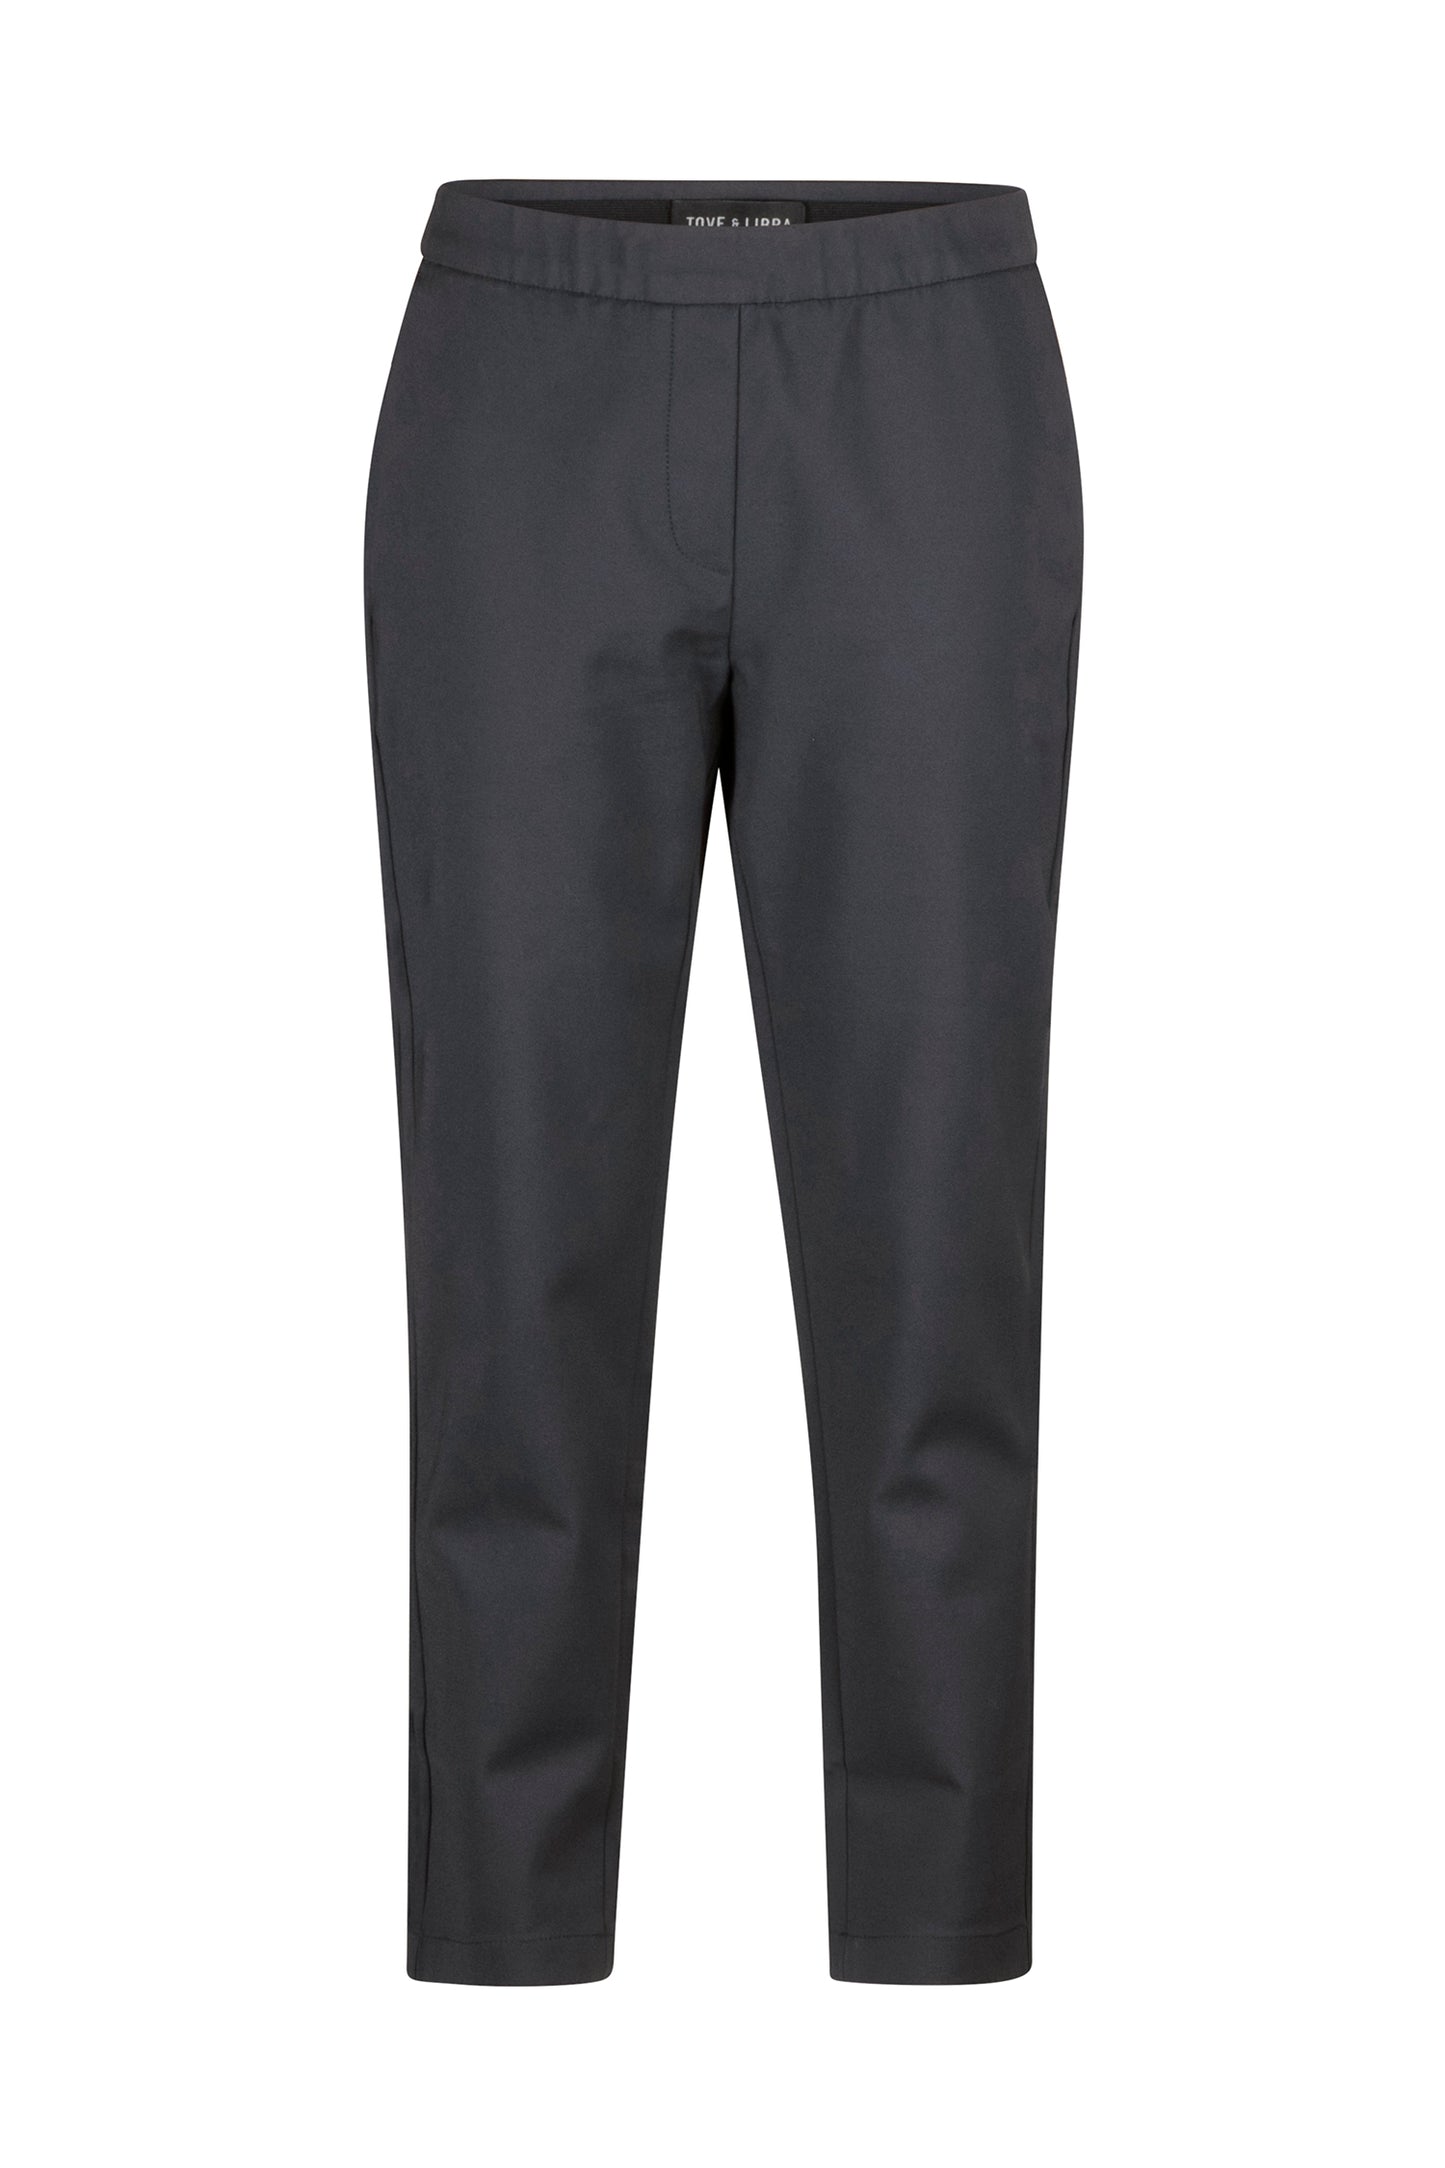 Pull-on Slim Chino (classic) - Charcoal